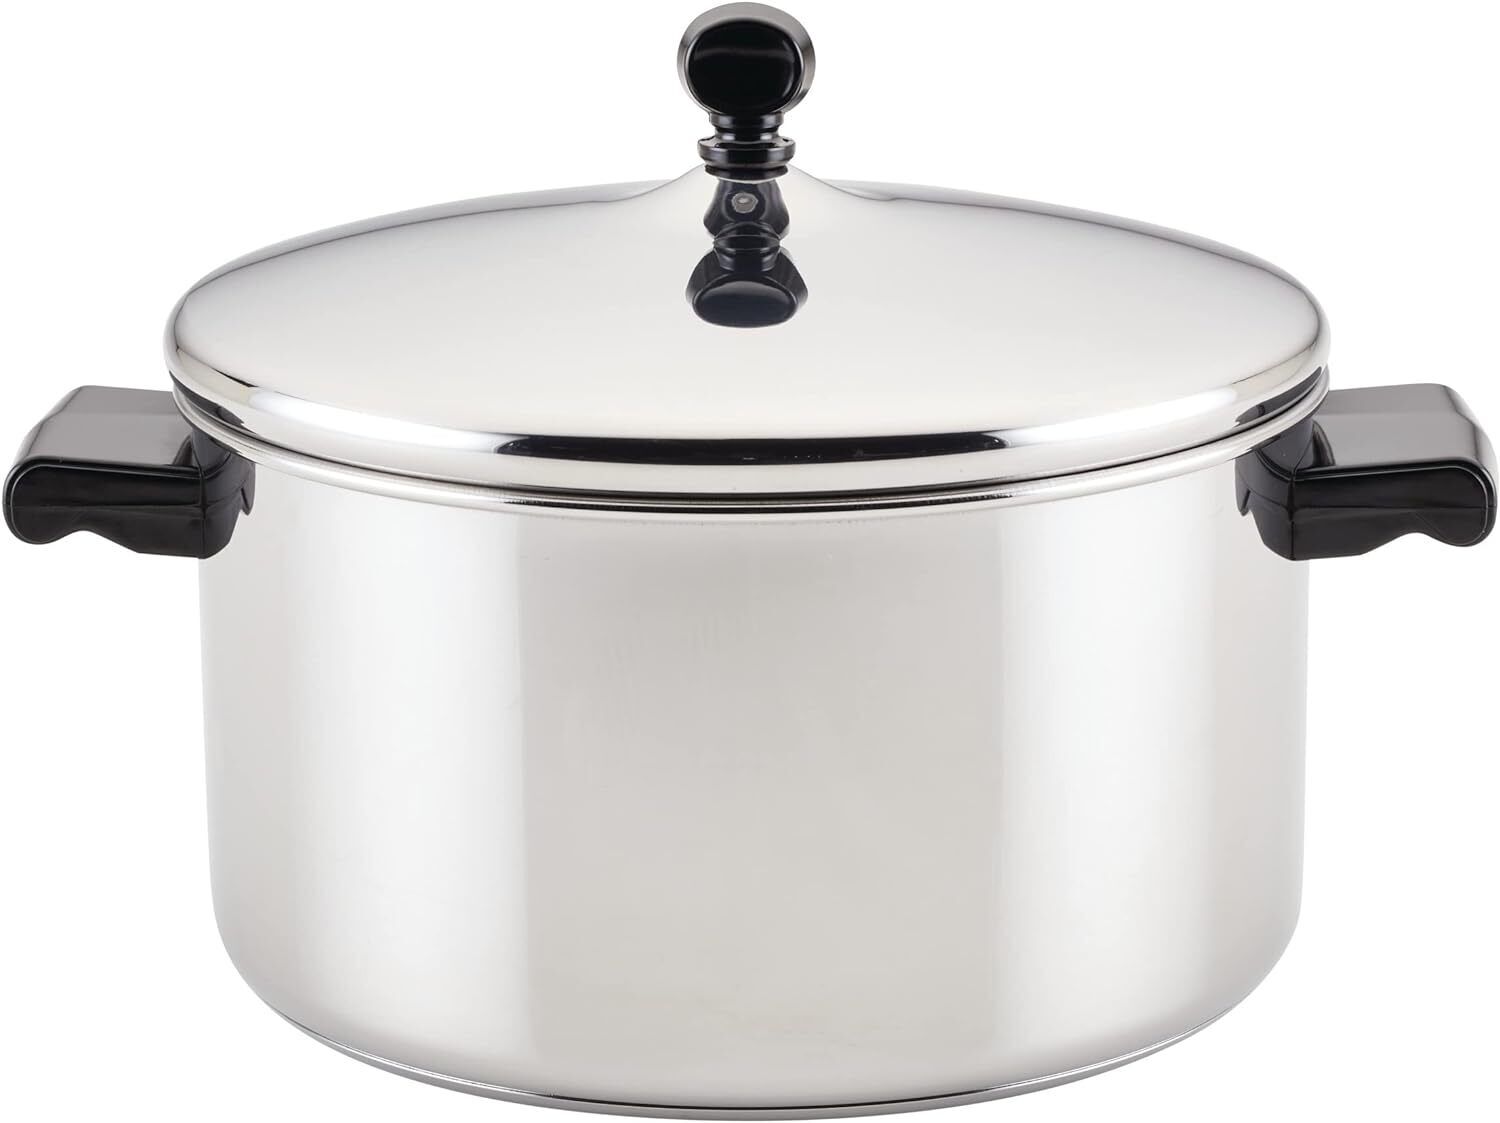 Farberware Classic Stainless Steel 6-Quart Stockpot with Lid, Stainless Steel